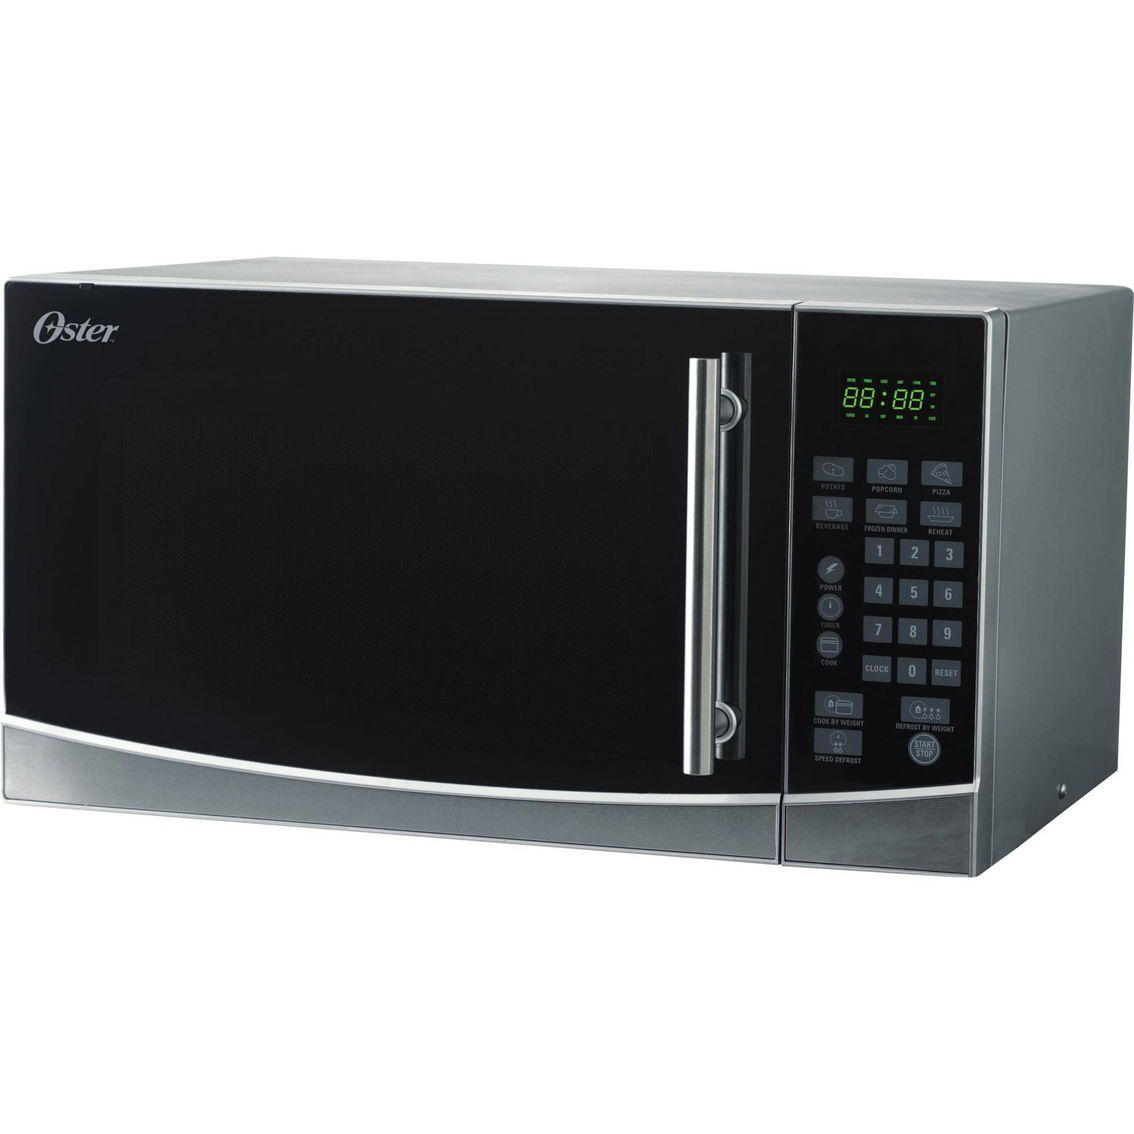 Oster 1.1 Cu. Ft. Microwave Oven | Microwave Ovens | Household | Shop